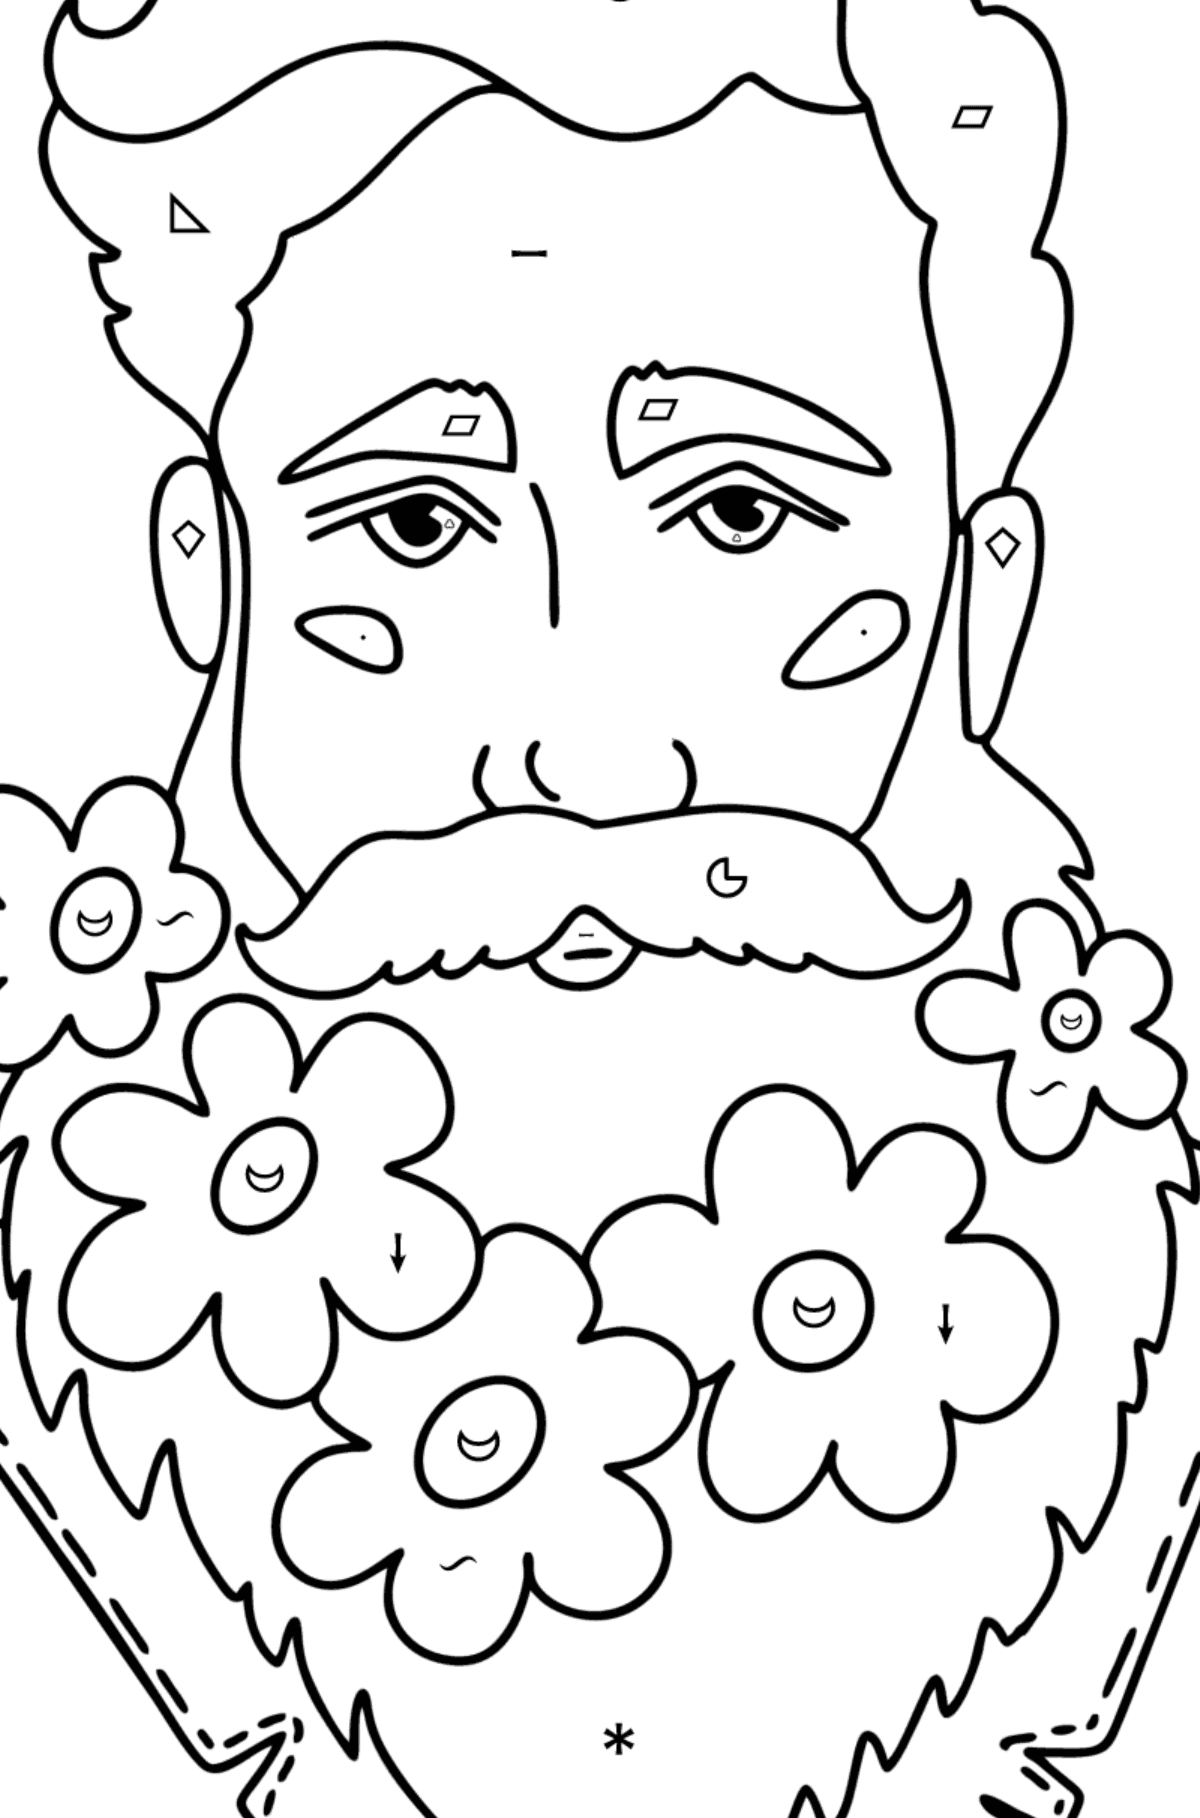 Young man with a beard сoloring page - Coloring by Symbols and Geometric Shapes for Kids